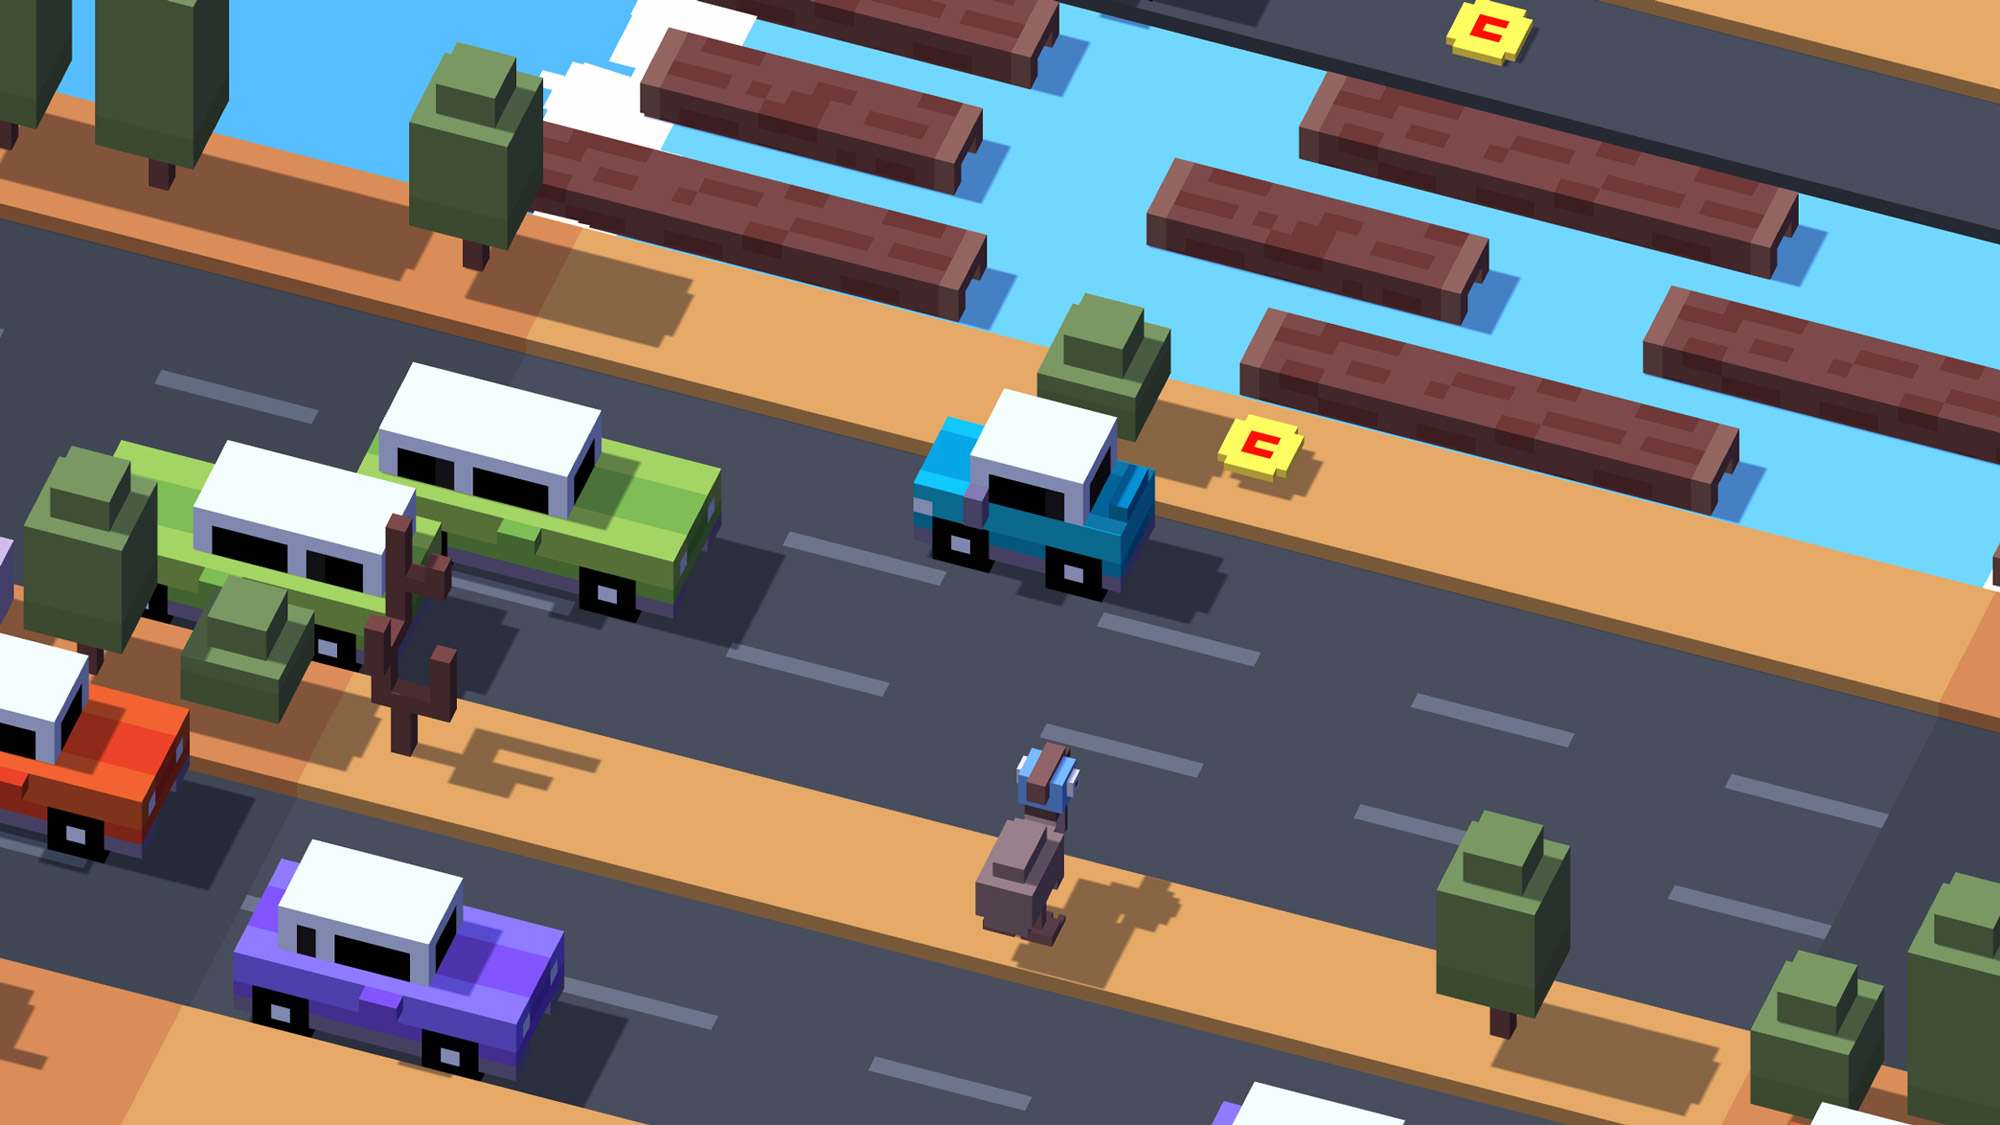 CROSSY ROAD - Play Online for Free!